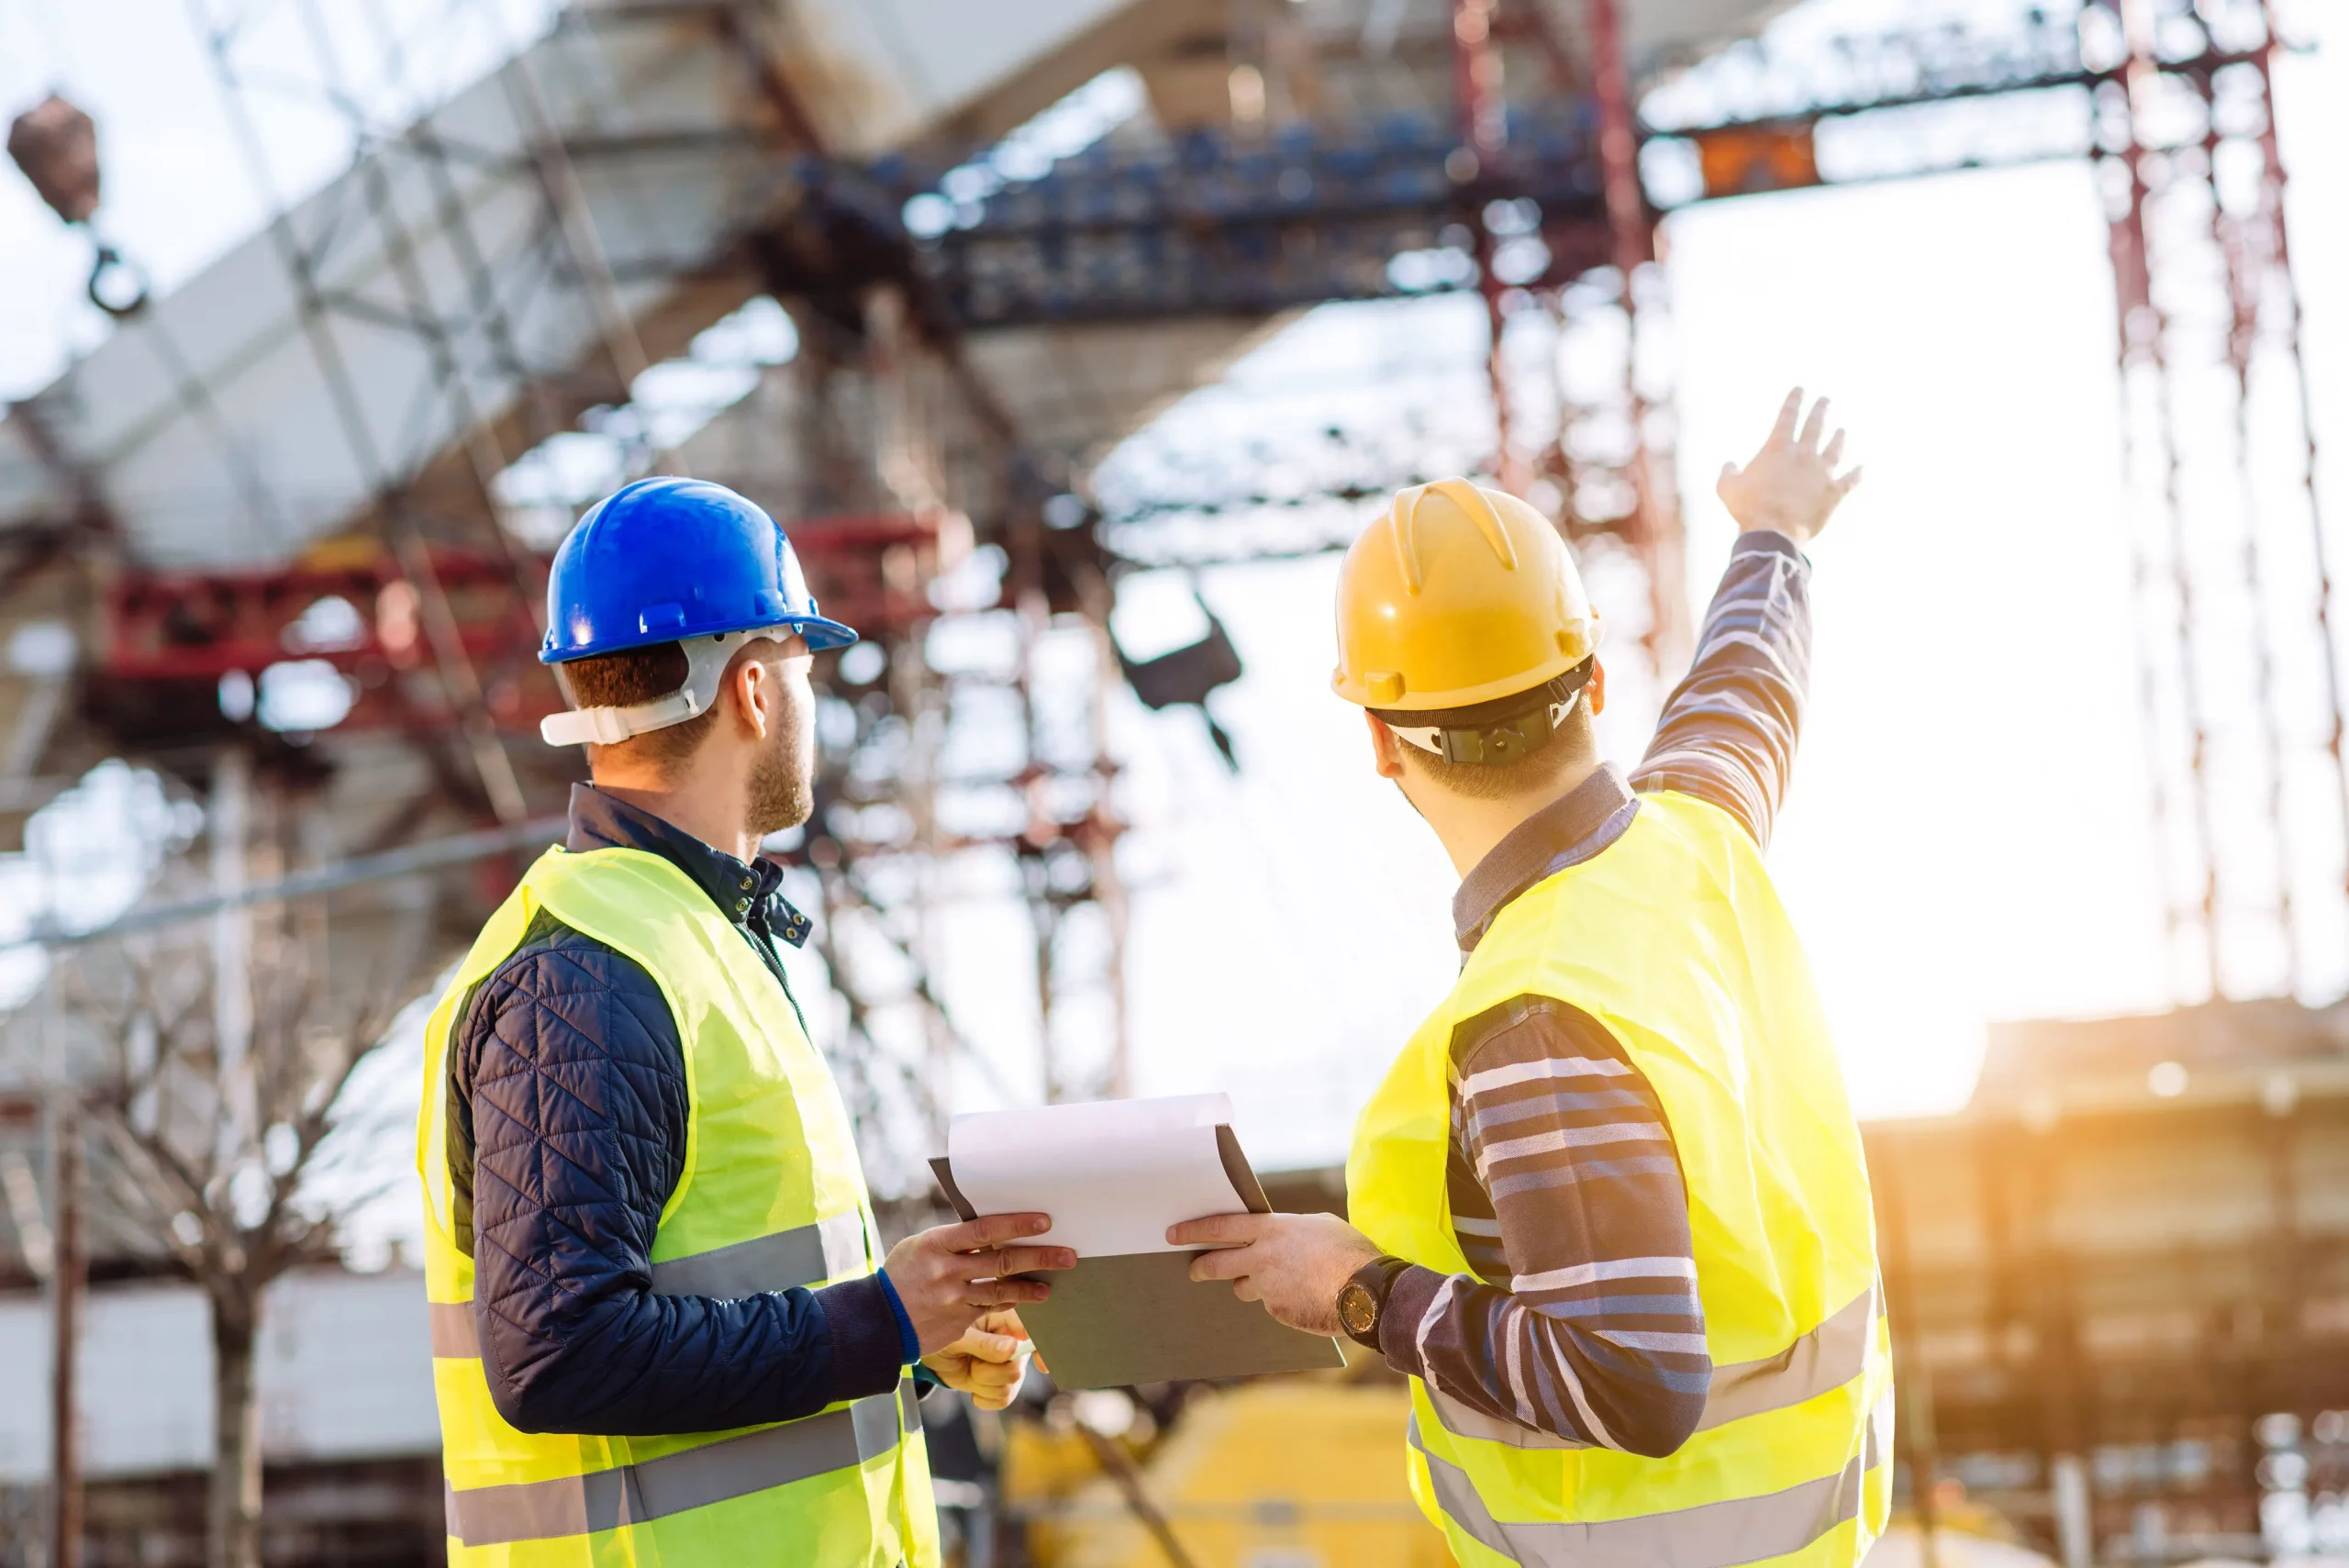 A Simple Path to Workplace Safety through Inspections